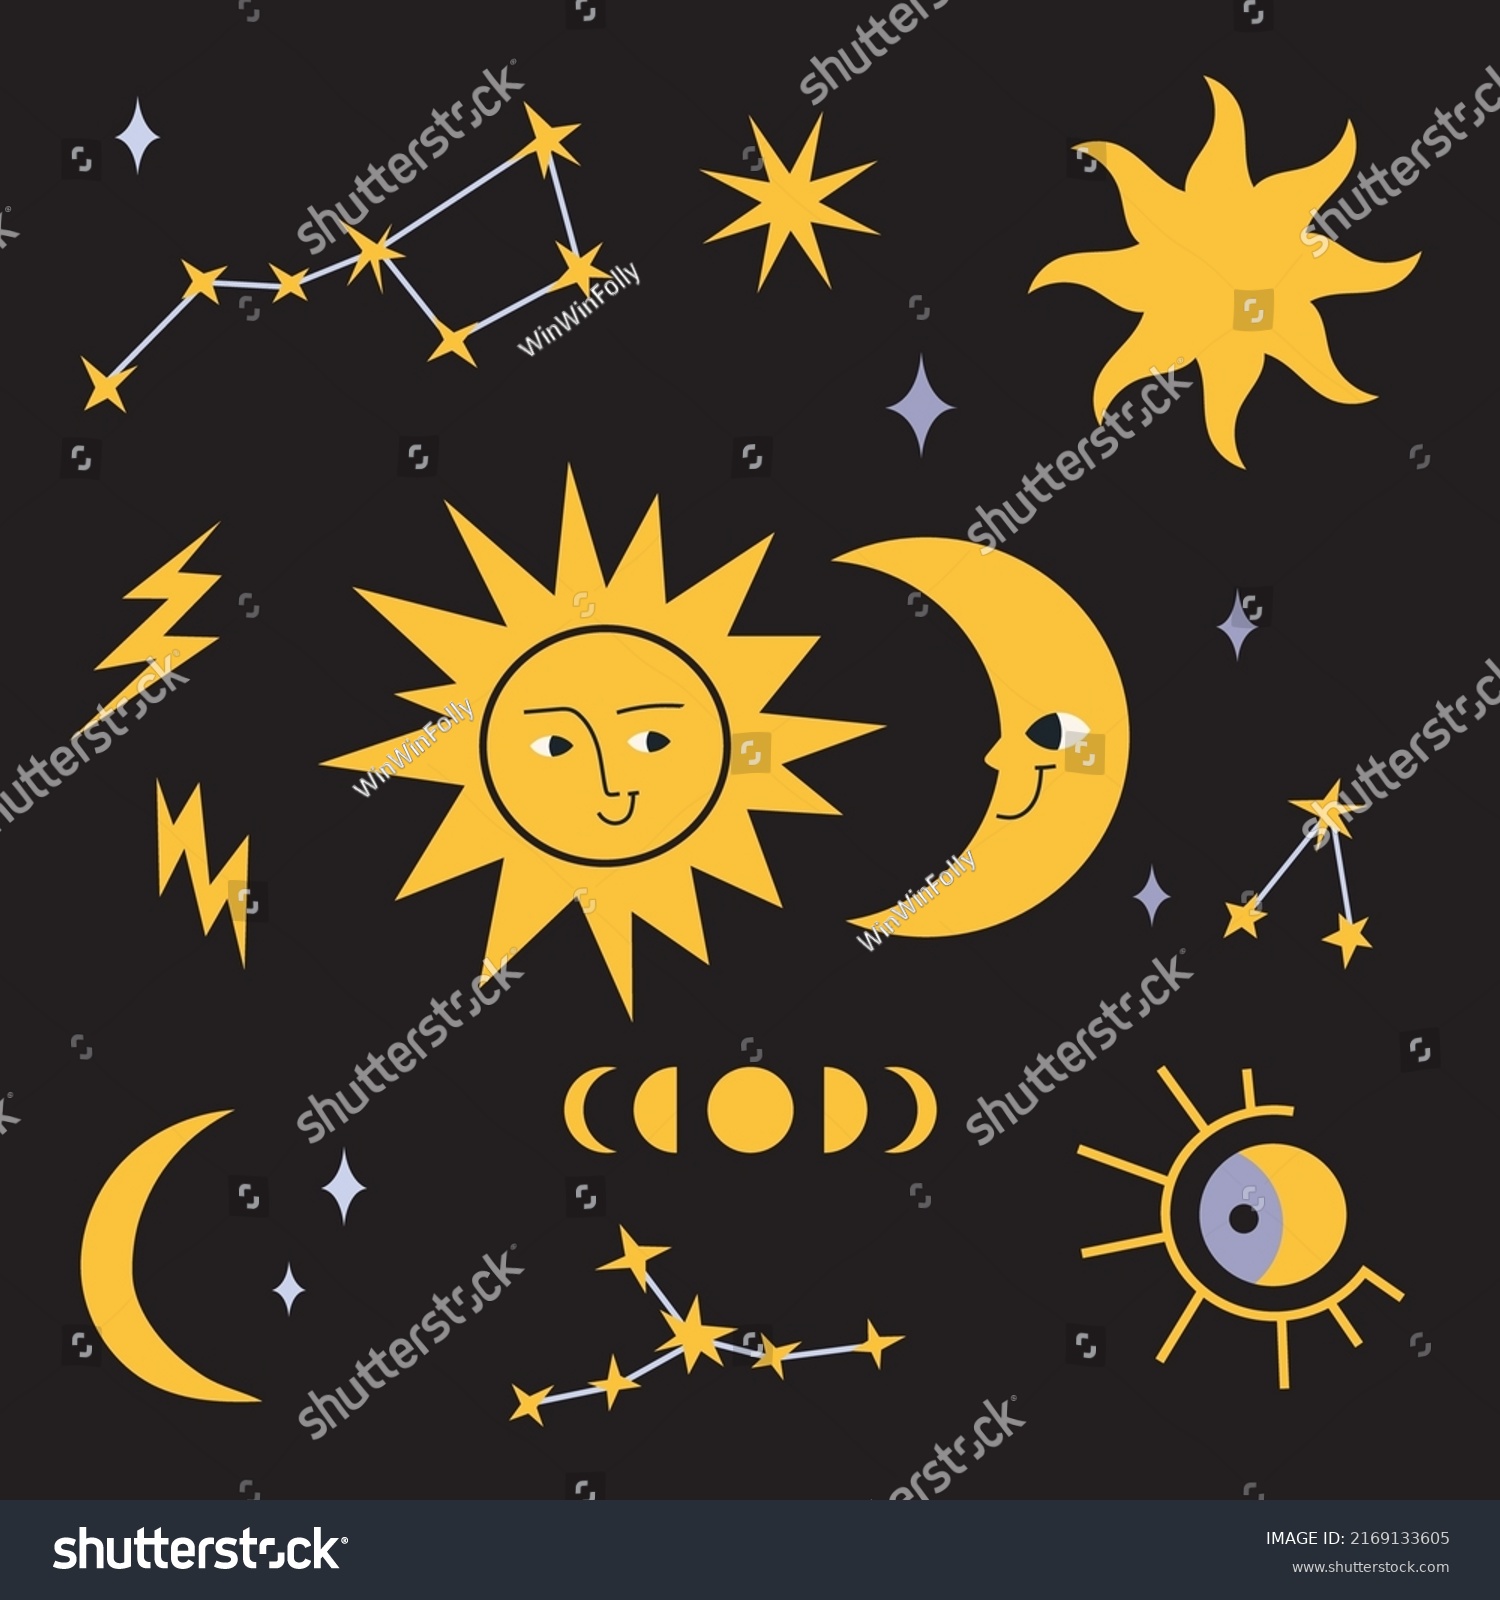 SVG of Sun and moon, constellations, phases of the moon, cartoon style. Cute character. Trendy modern vector illustration, hand drawn, flat design. svg